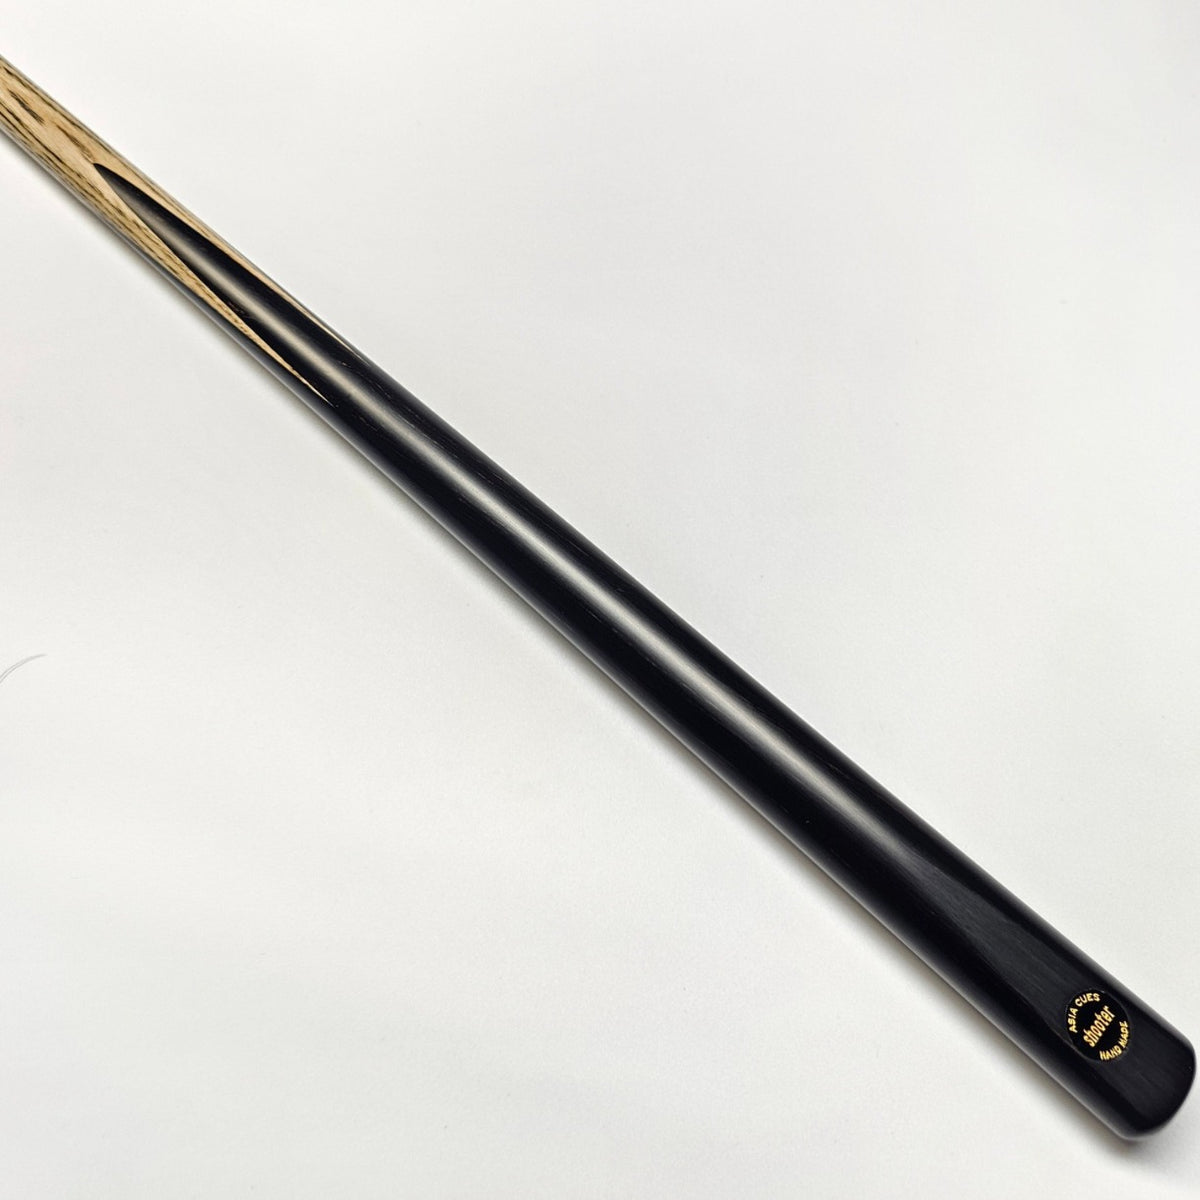 Asia Cues Shooter  One Piece Snooker Cue  Handmade Ebony Butt. Butt View